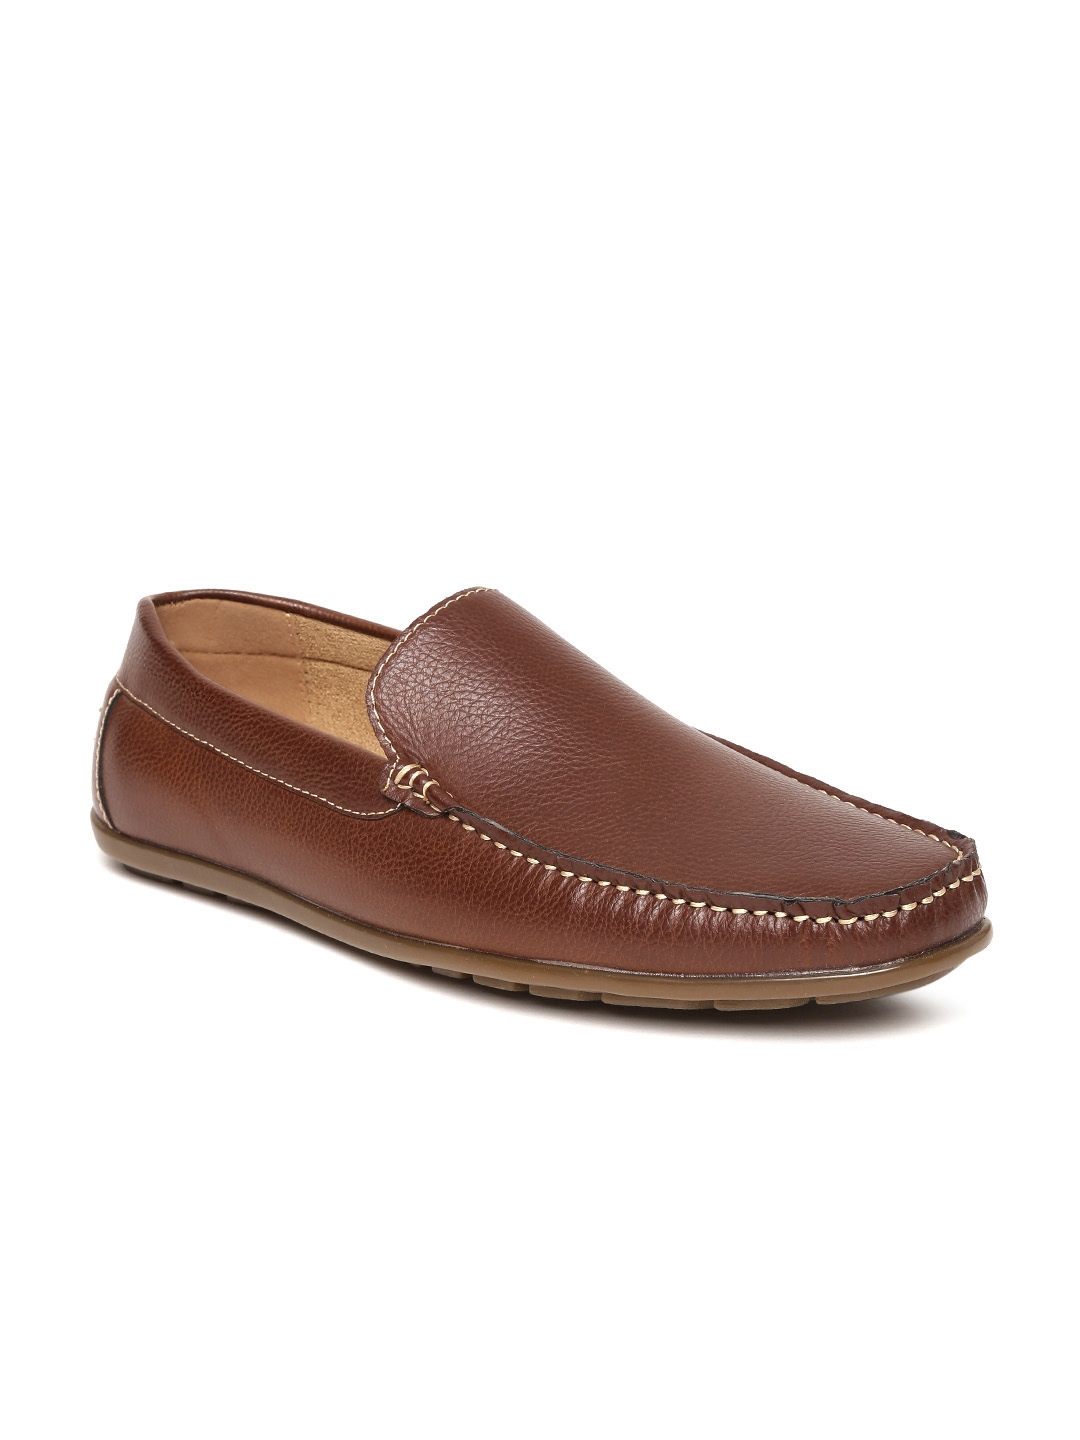 Buy Bata Men Brown Driving Shoes - Casual Shoes for Men 2059318 | Myntra